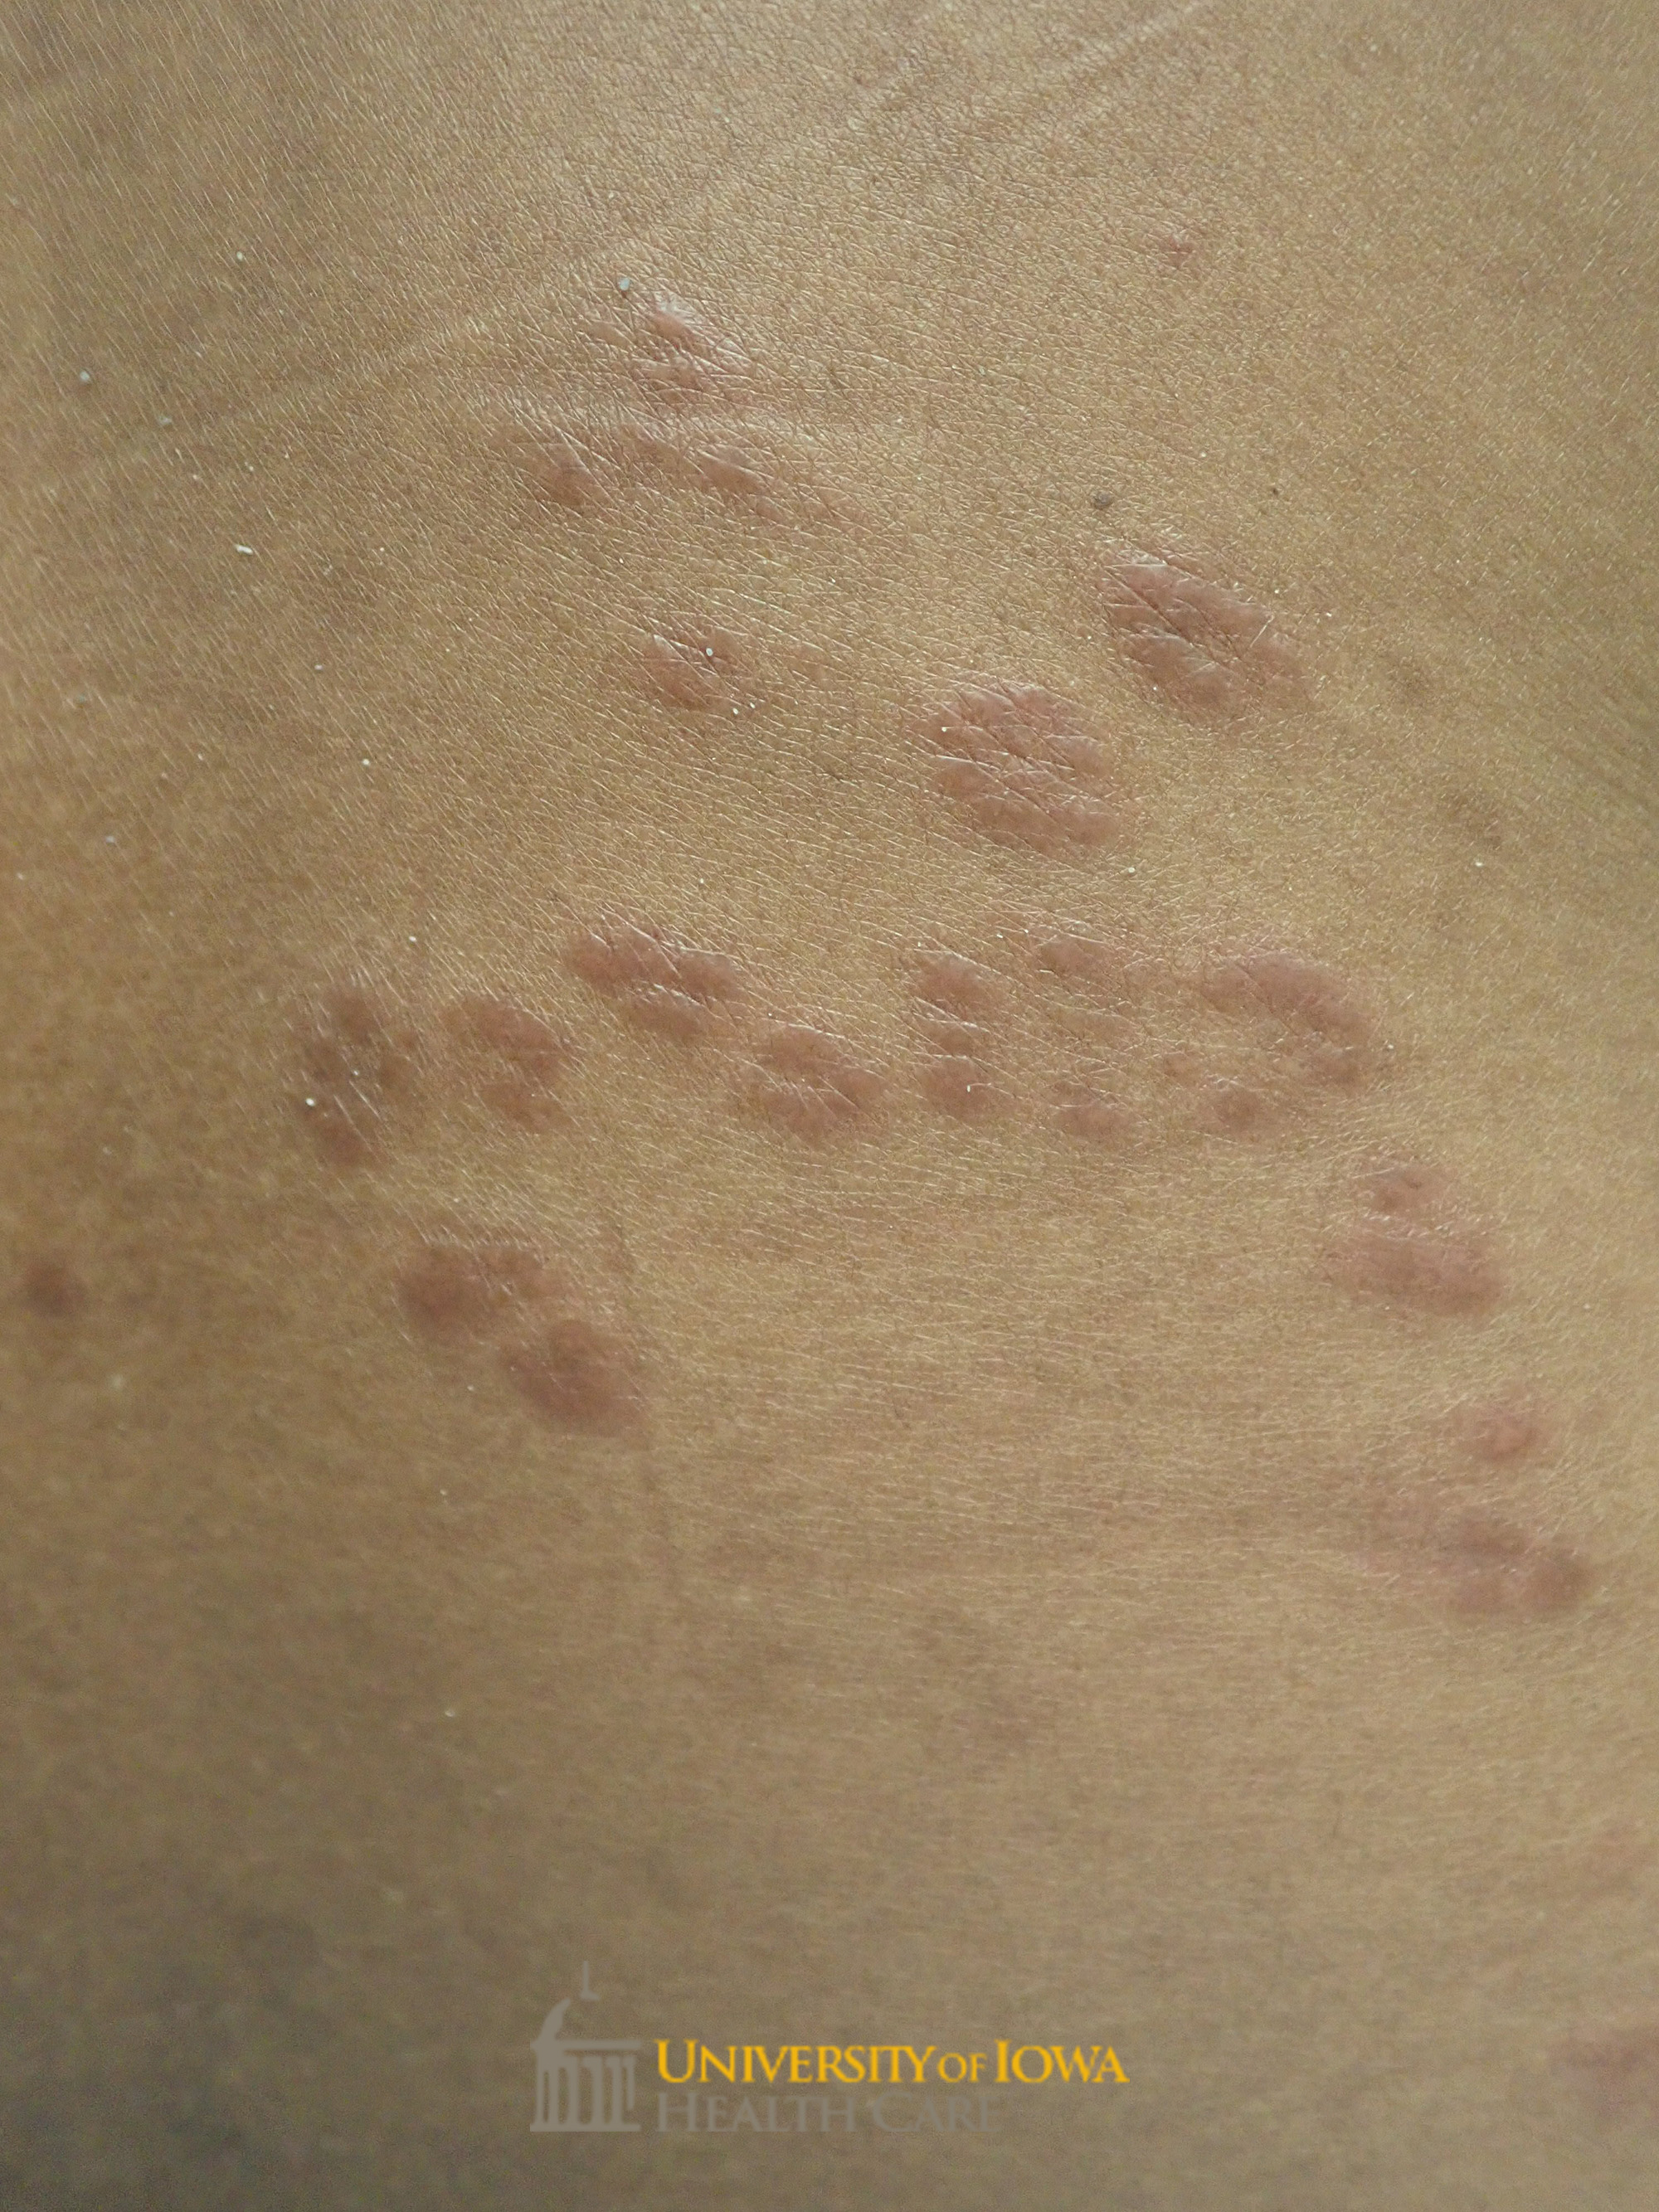 Shiny, red-brown clustered papules on the back. (click images for higher resolution).